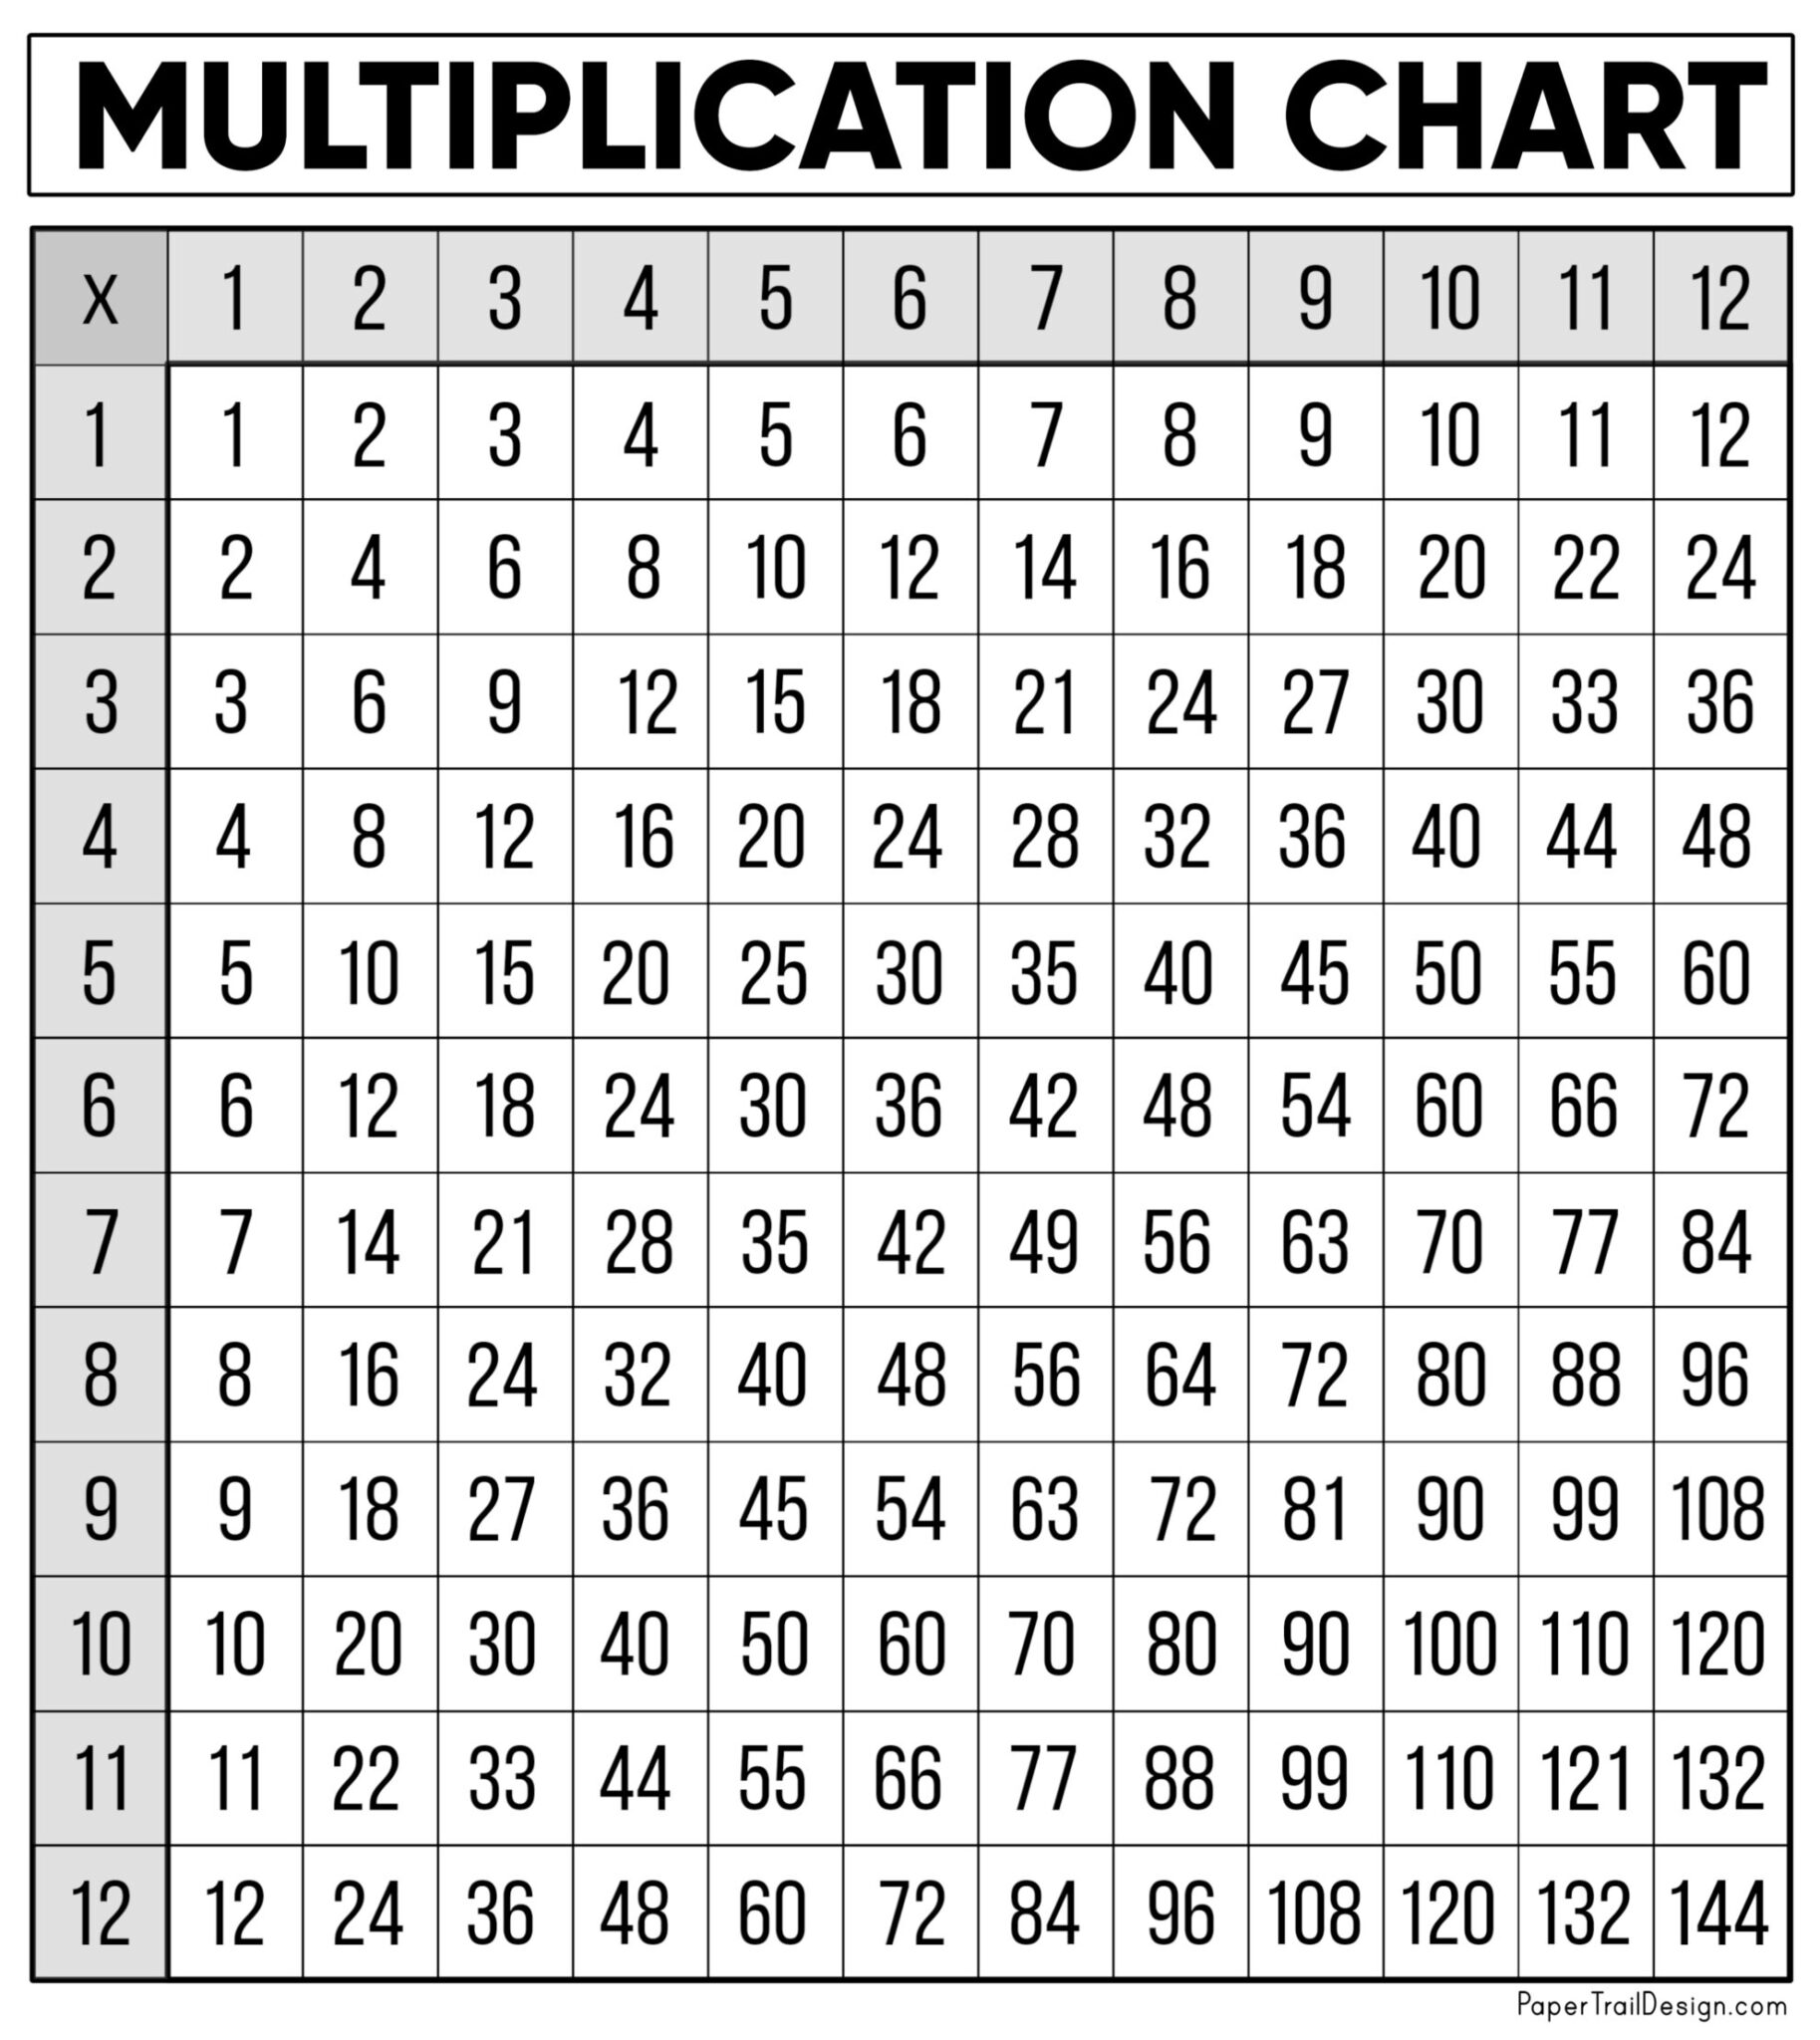 find multiplication chart to print